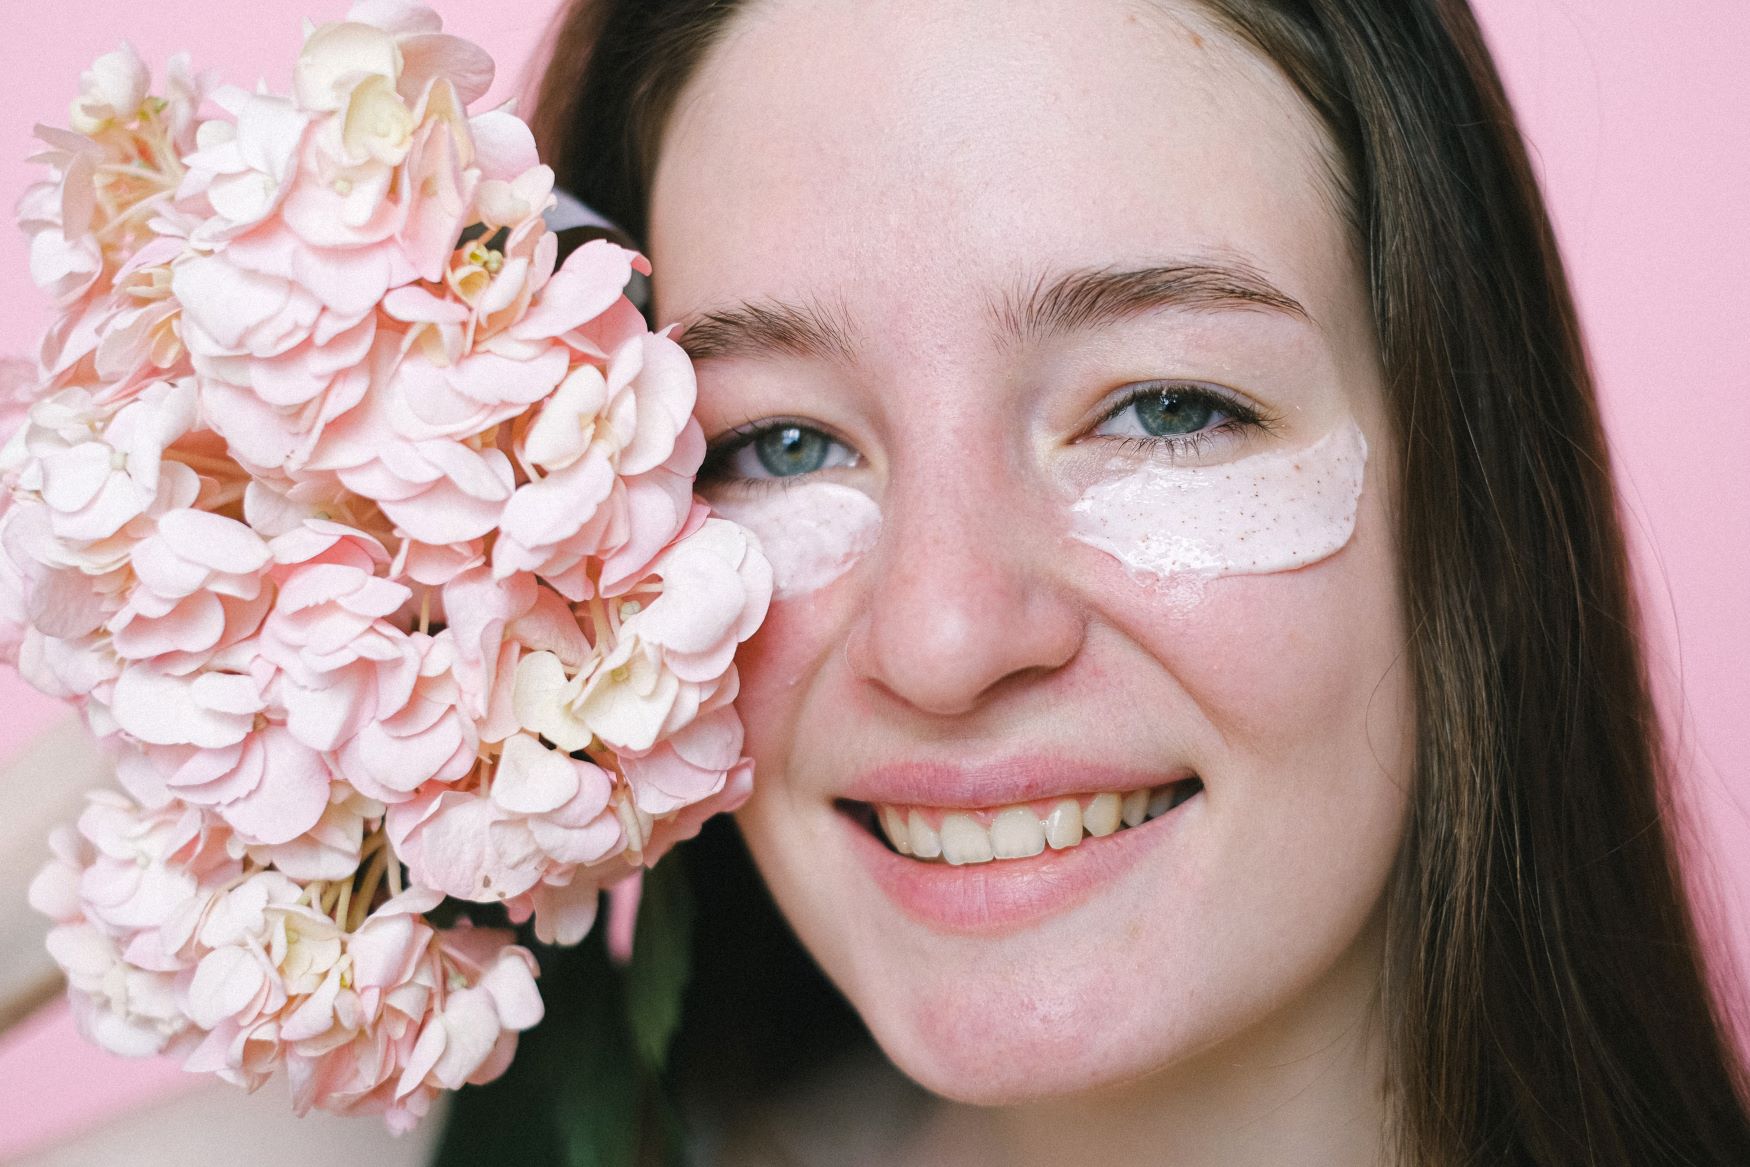 An image of a woman with eye cream on her eyes.